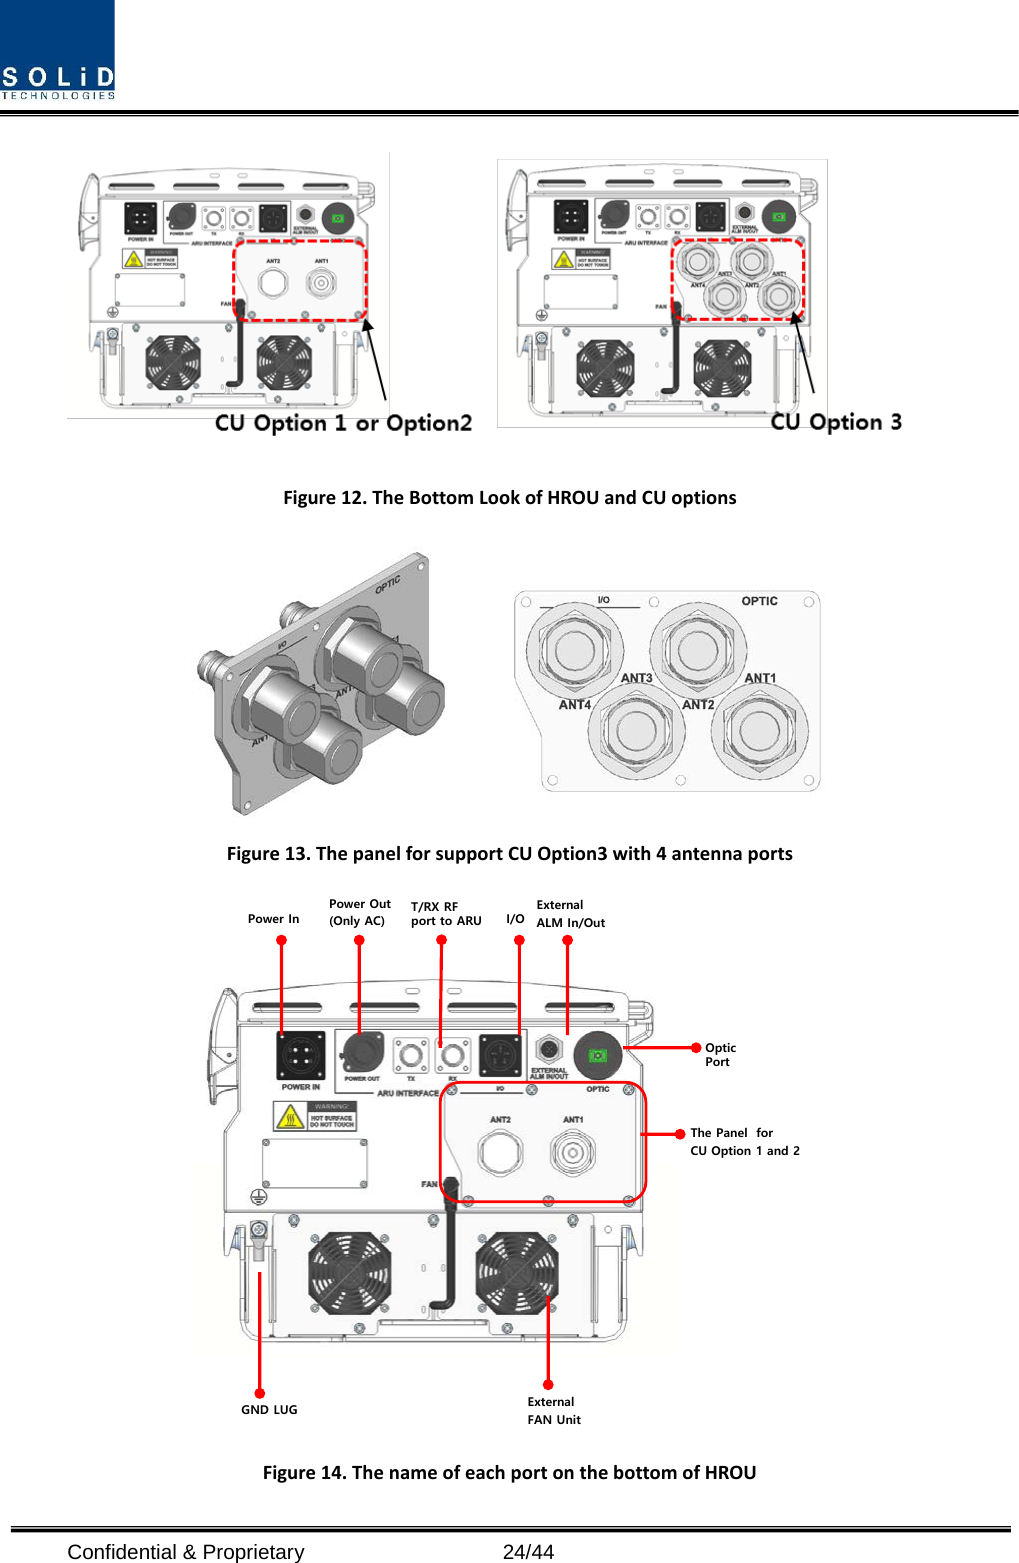  Confidential &amp; Proprietary                   24/44  Figure 12. The Bottom Look of HROU and CU options  Figure 13. The panel for support CU Option3 with 4 antenna ports  Figure 14. The name of each port on the bottom of HROU  Power InPower Out(Only AC)T/RX RF port to ARU  I/OExternalALM In/OutExternalFAN UnitGND LUG Optic PortThe Panel  for CU Option 1 and 2